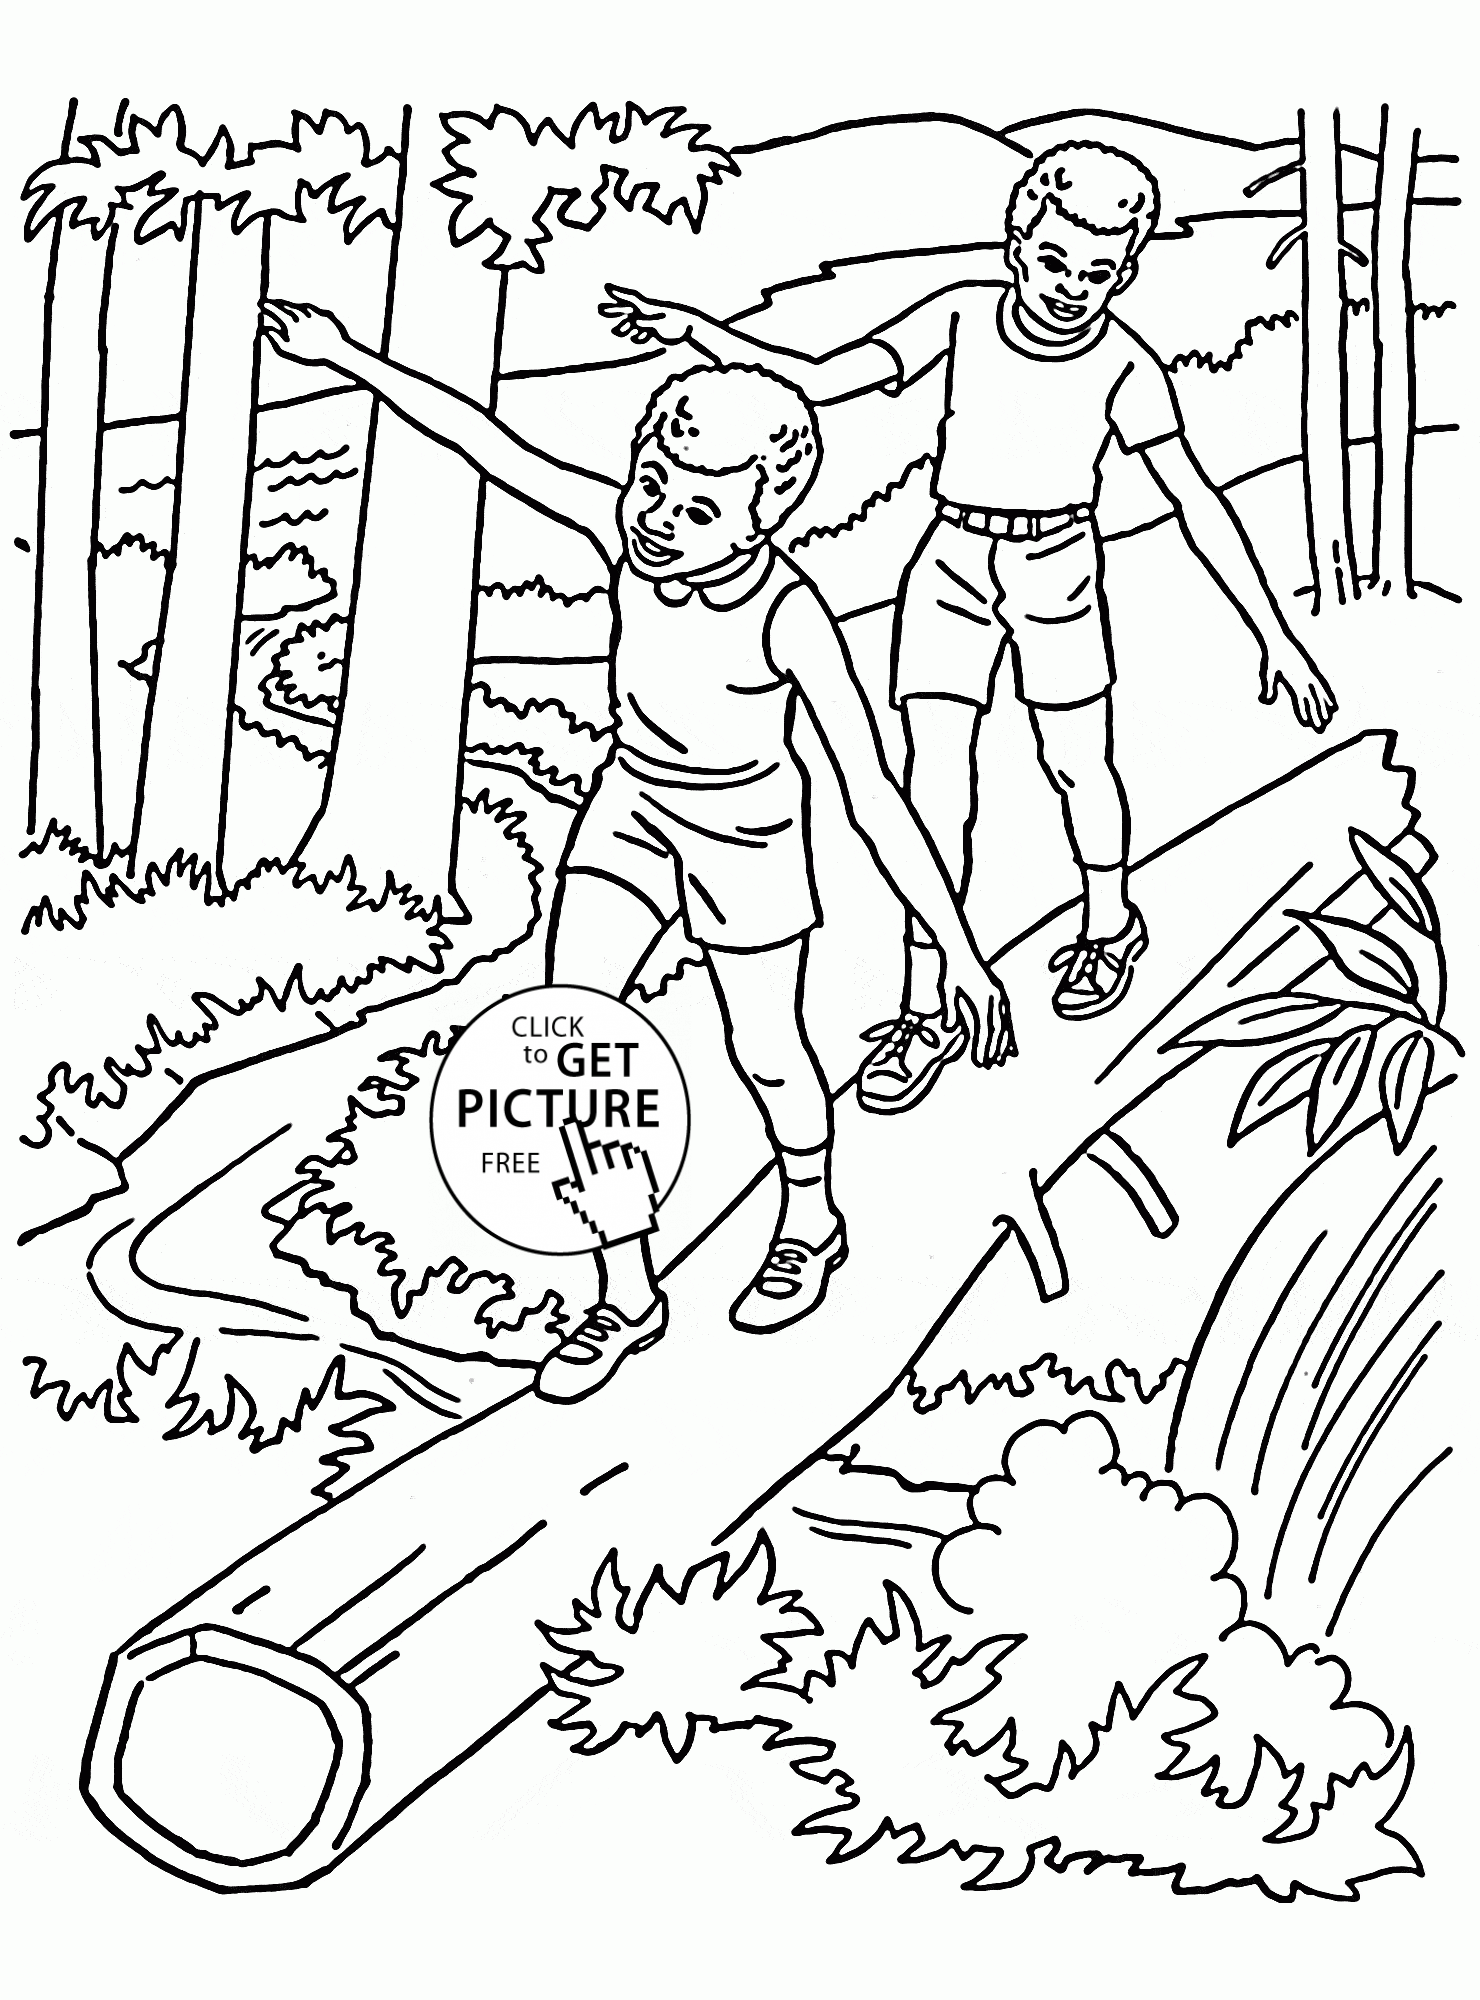 Forest in Summer coloring page for kids, seasons coloring pages ...